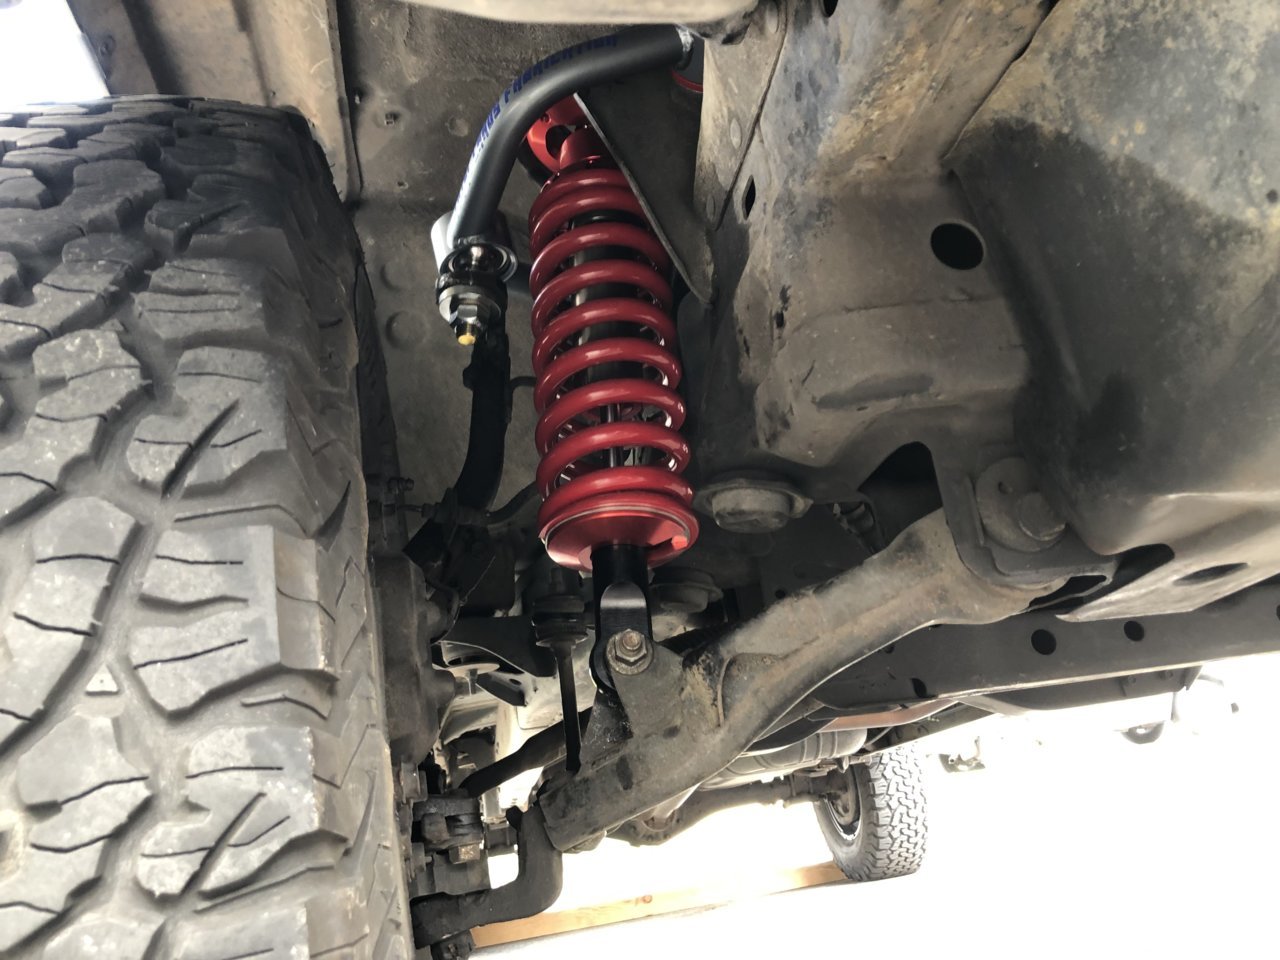 How to remove upper control arm from spindle? | Page 4 | Toyota Tundra